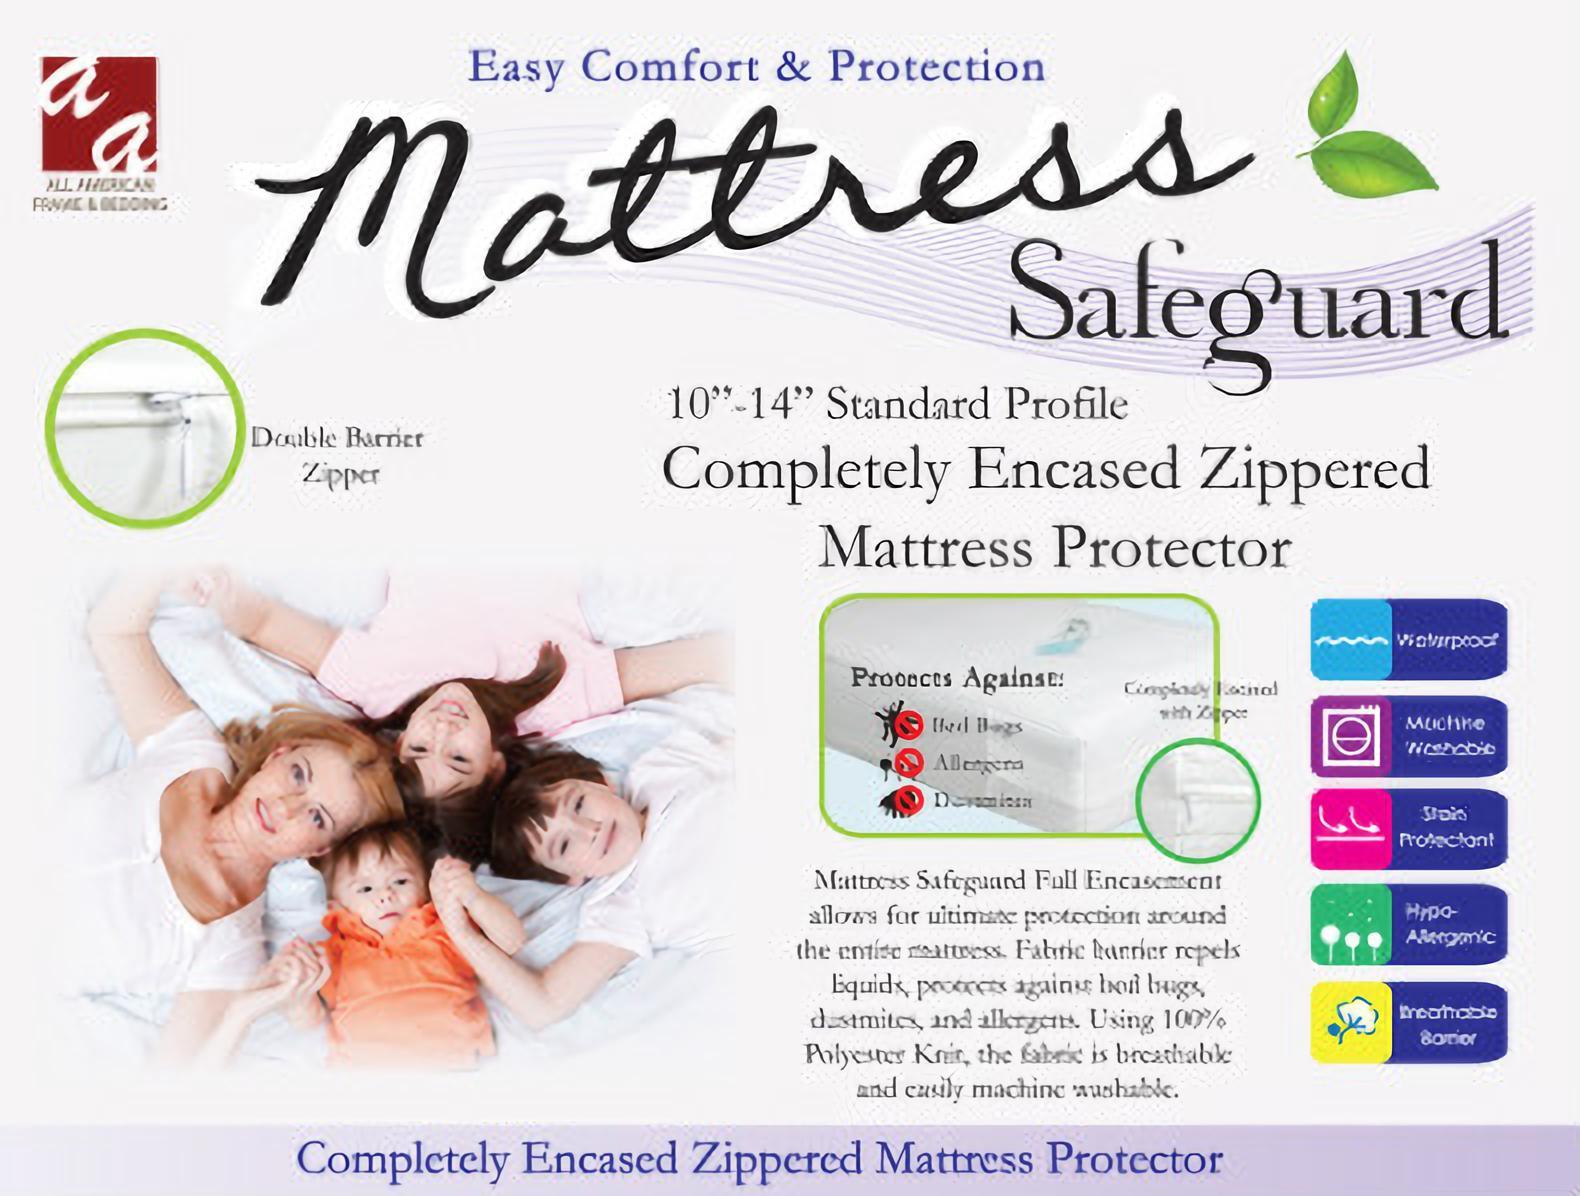 Mattress Safeguard Completely Encased Zippered Mattress Protector 14"-18" All American Frame & Bedding.